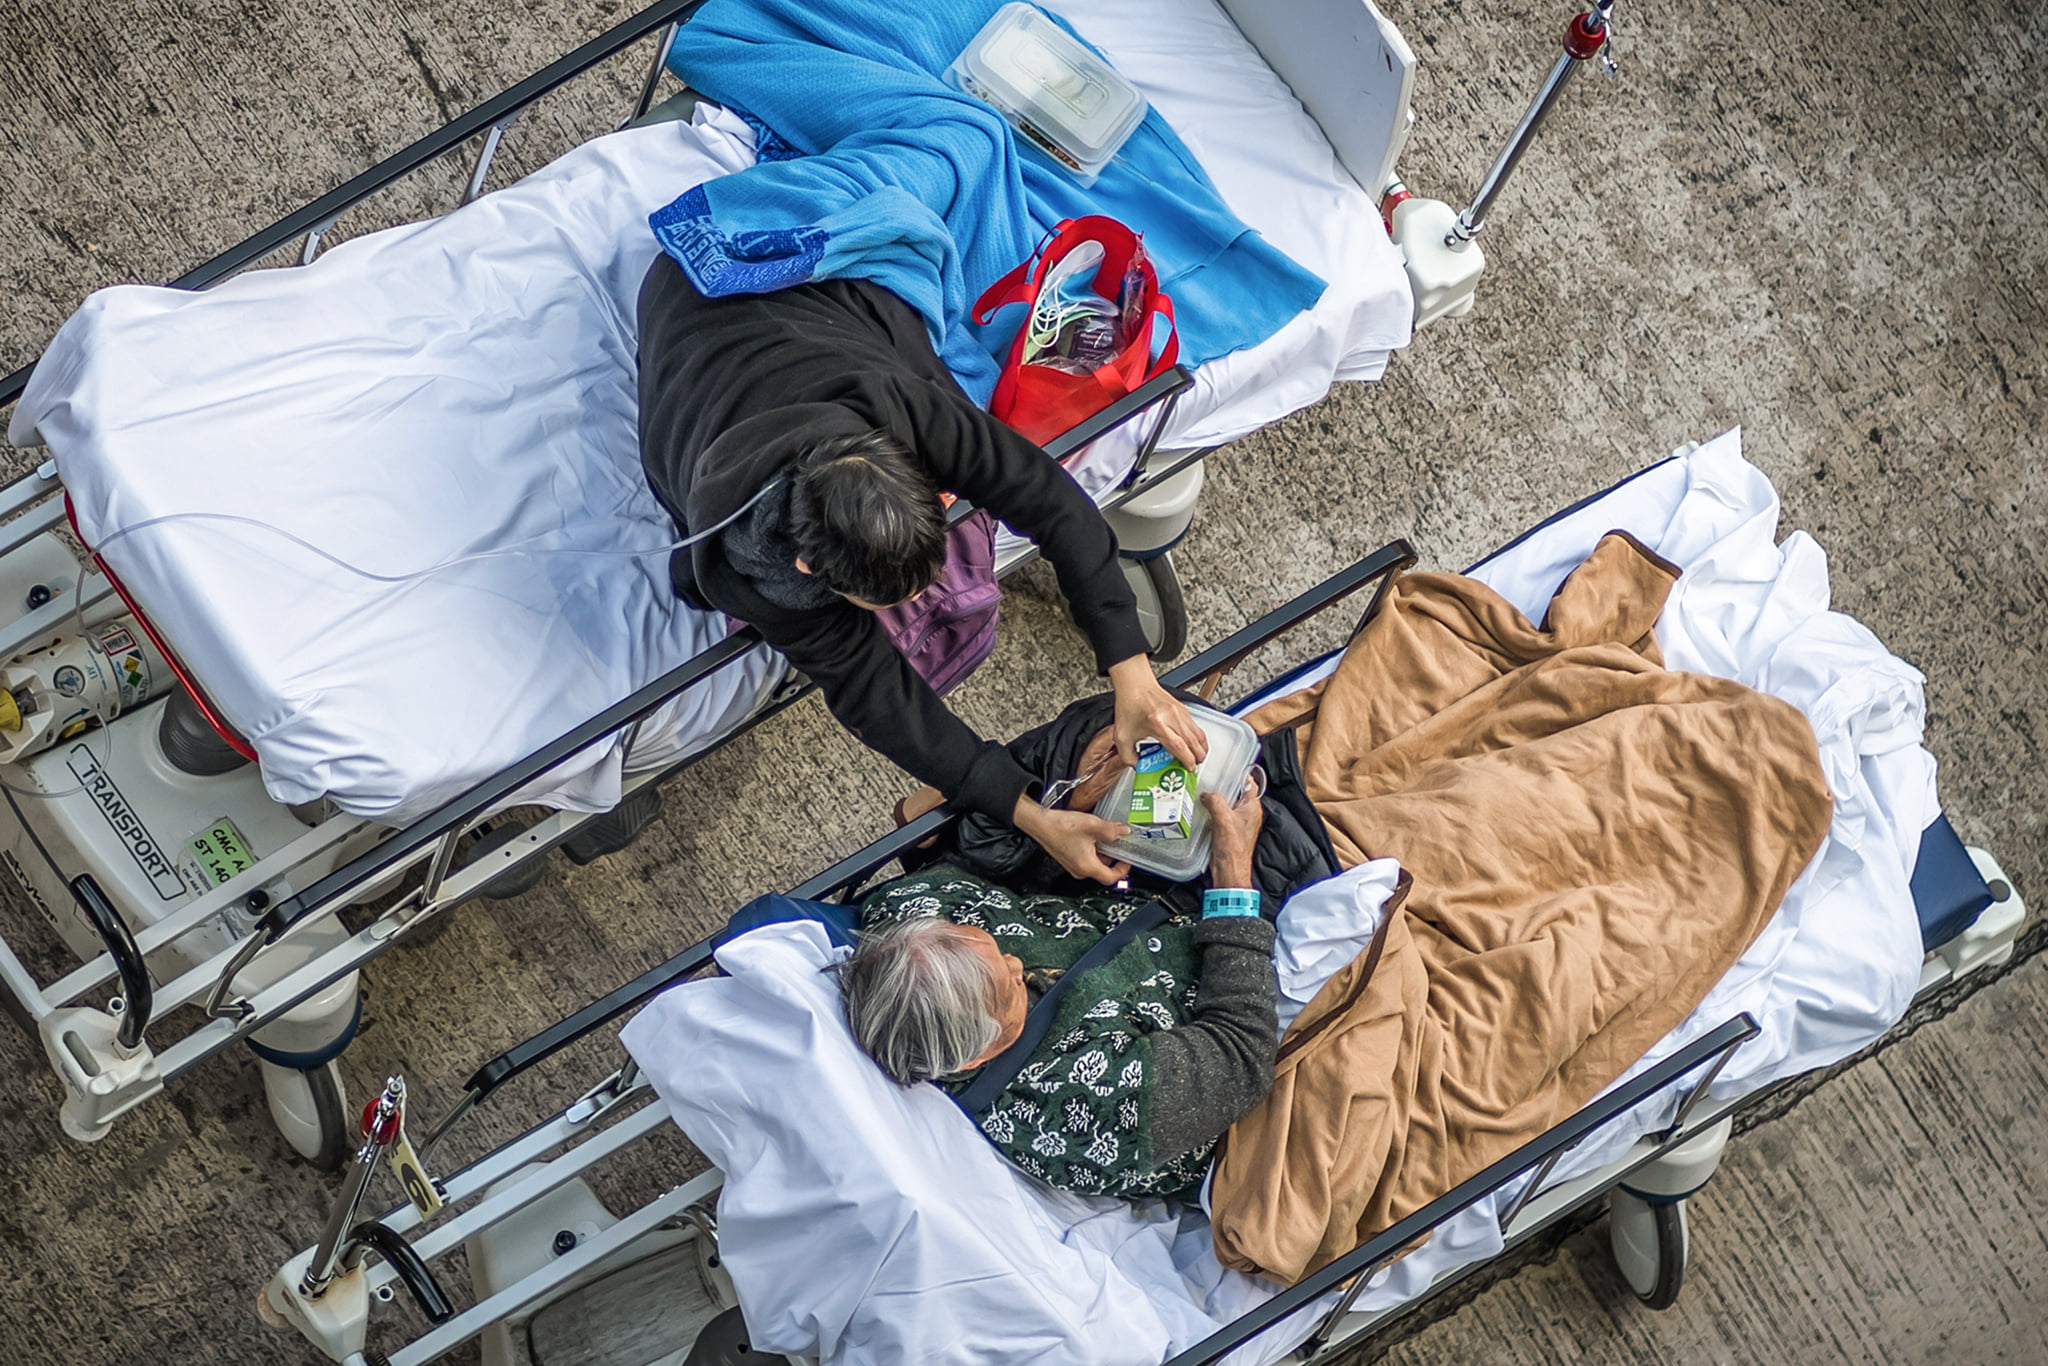 Two elderly patients were seen outside the Caritas Medical Centre in Shum Shui Po on February 16, 2022.